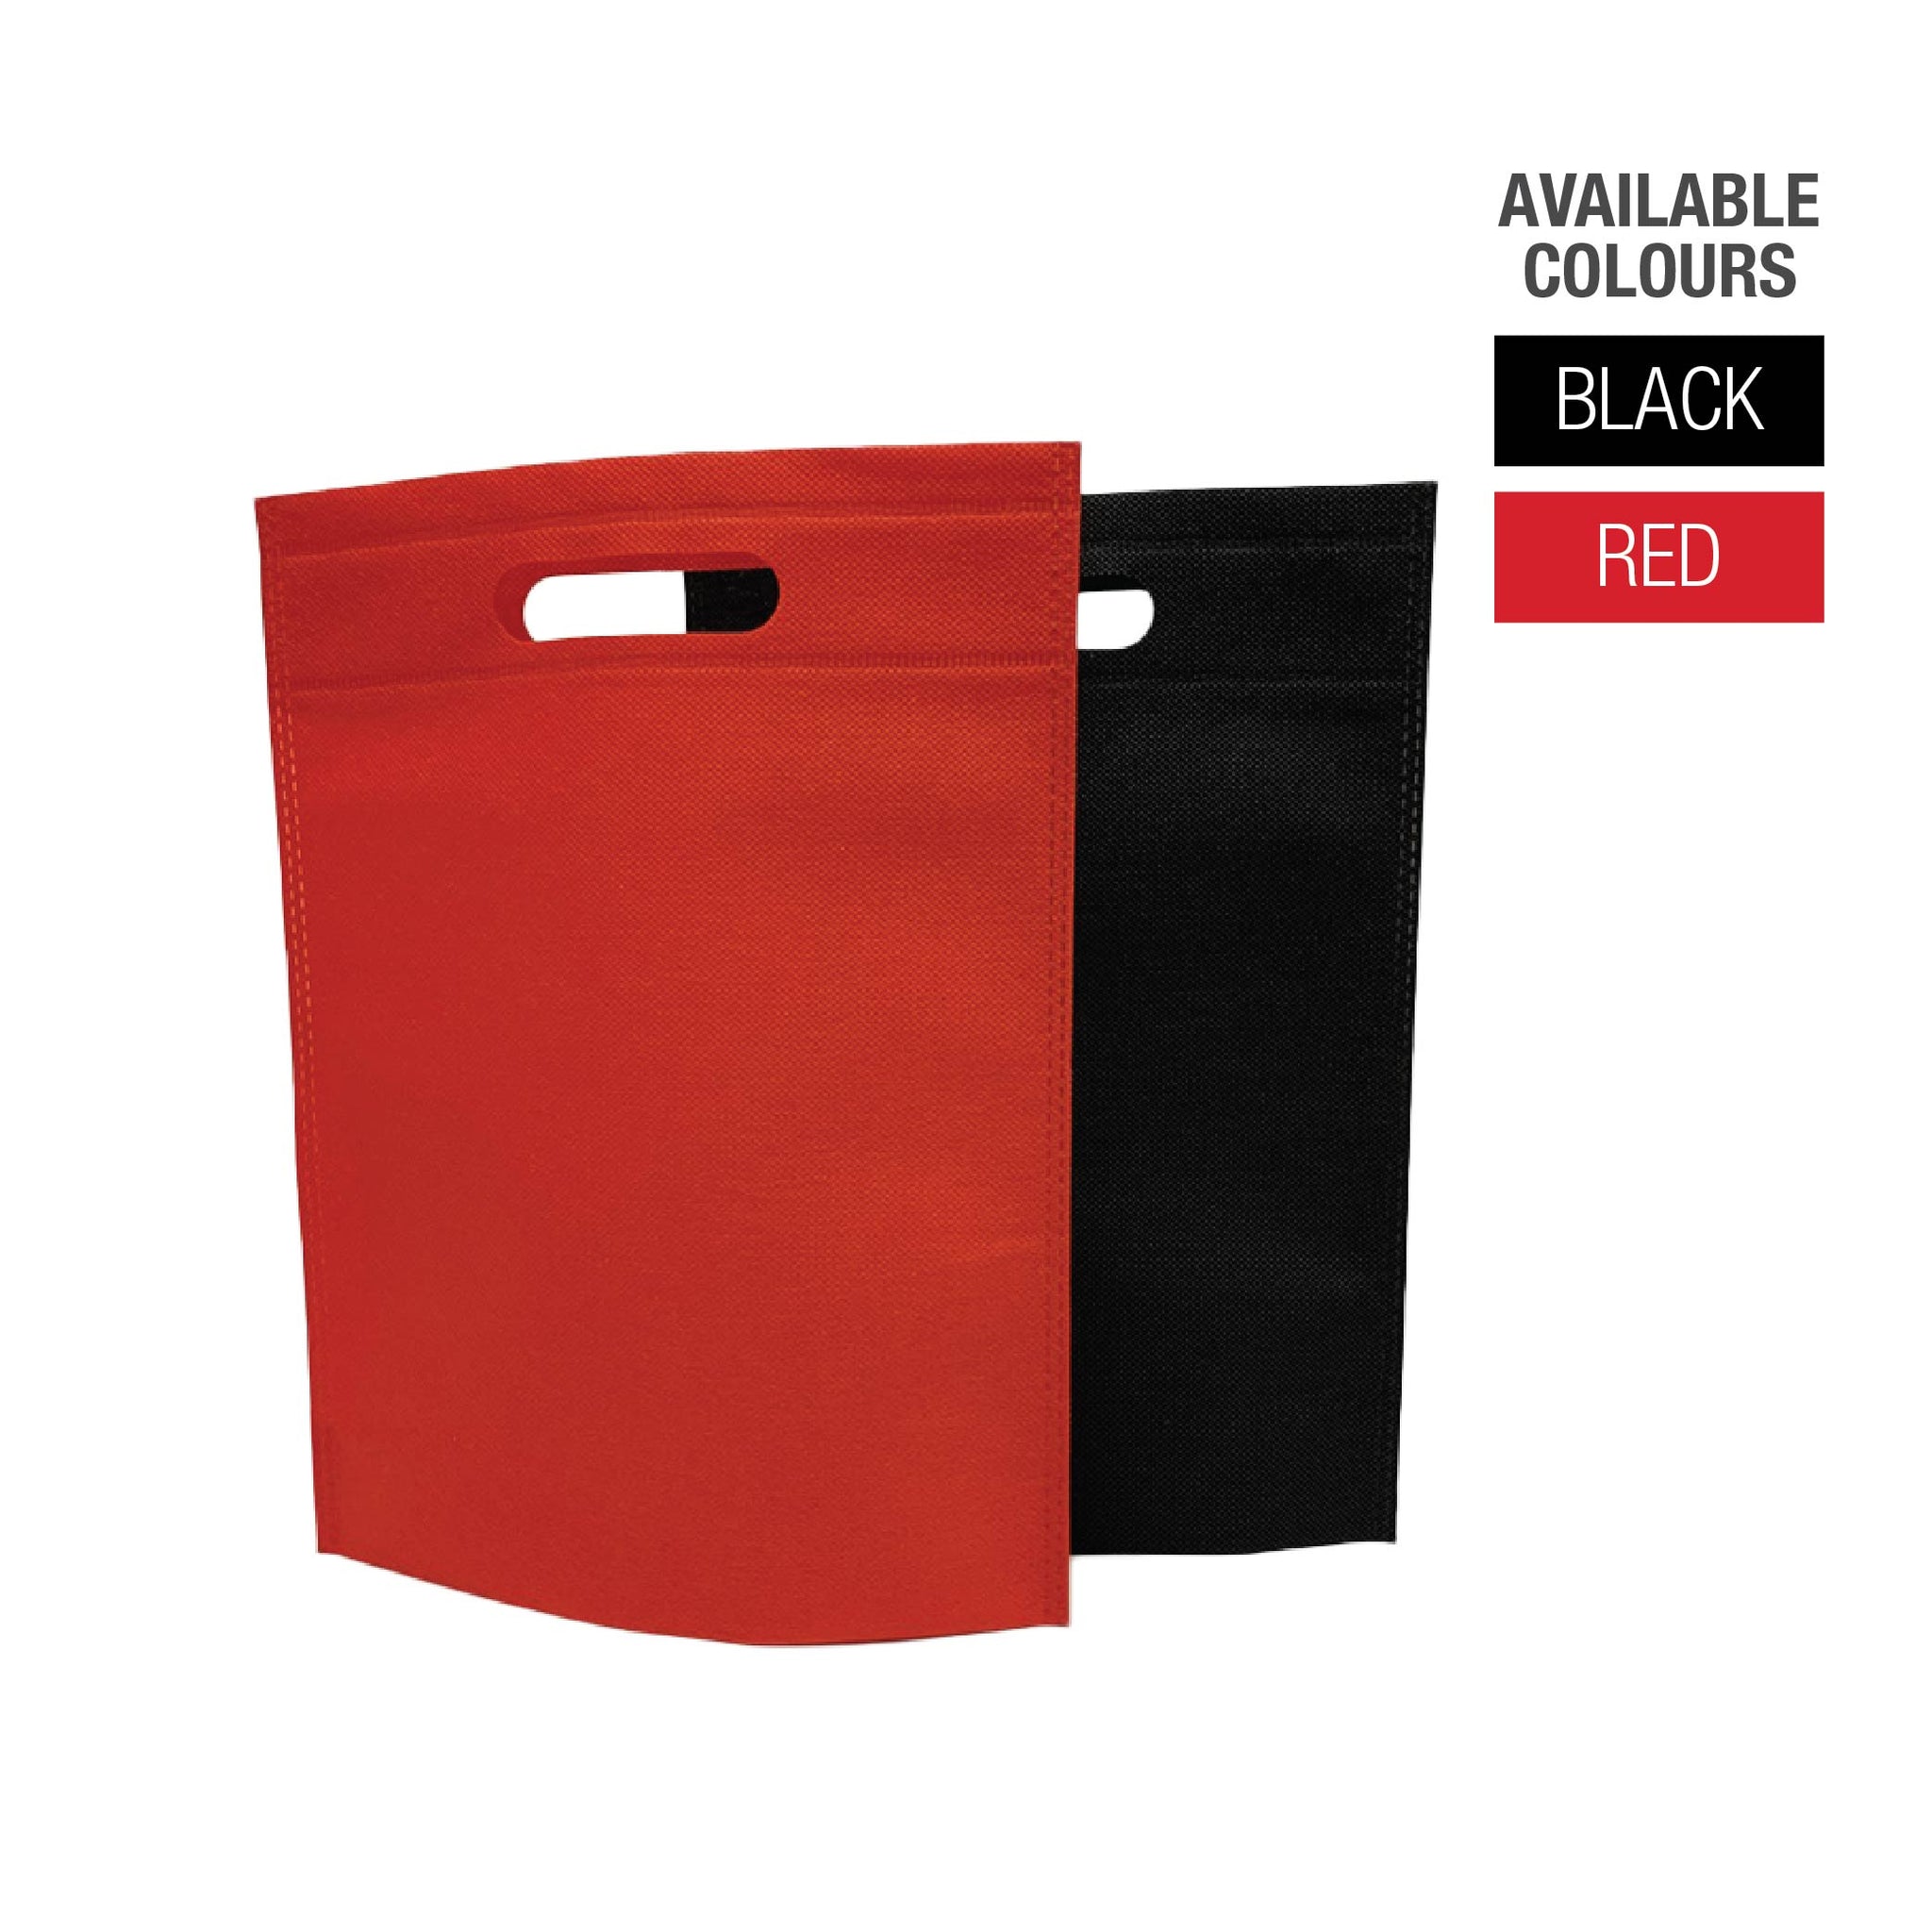 Two non-woven shopping bags with sturdy die-cut handles